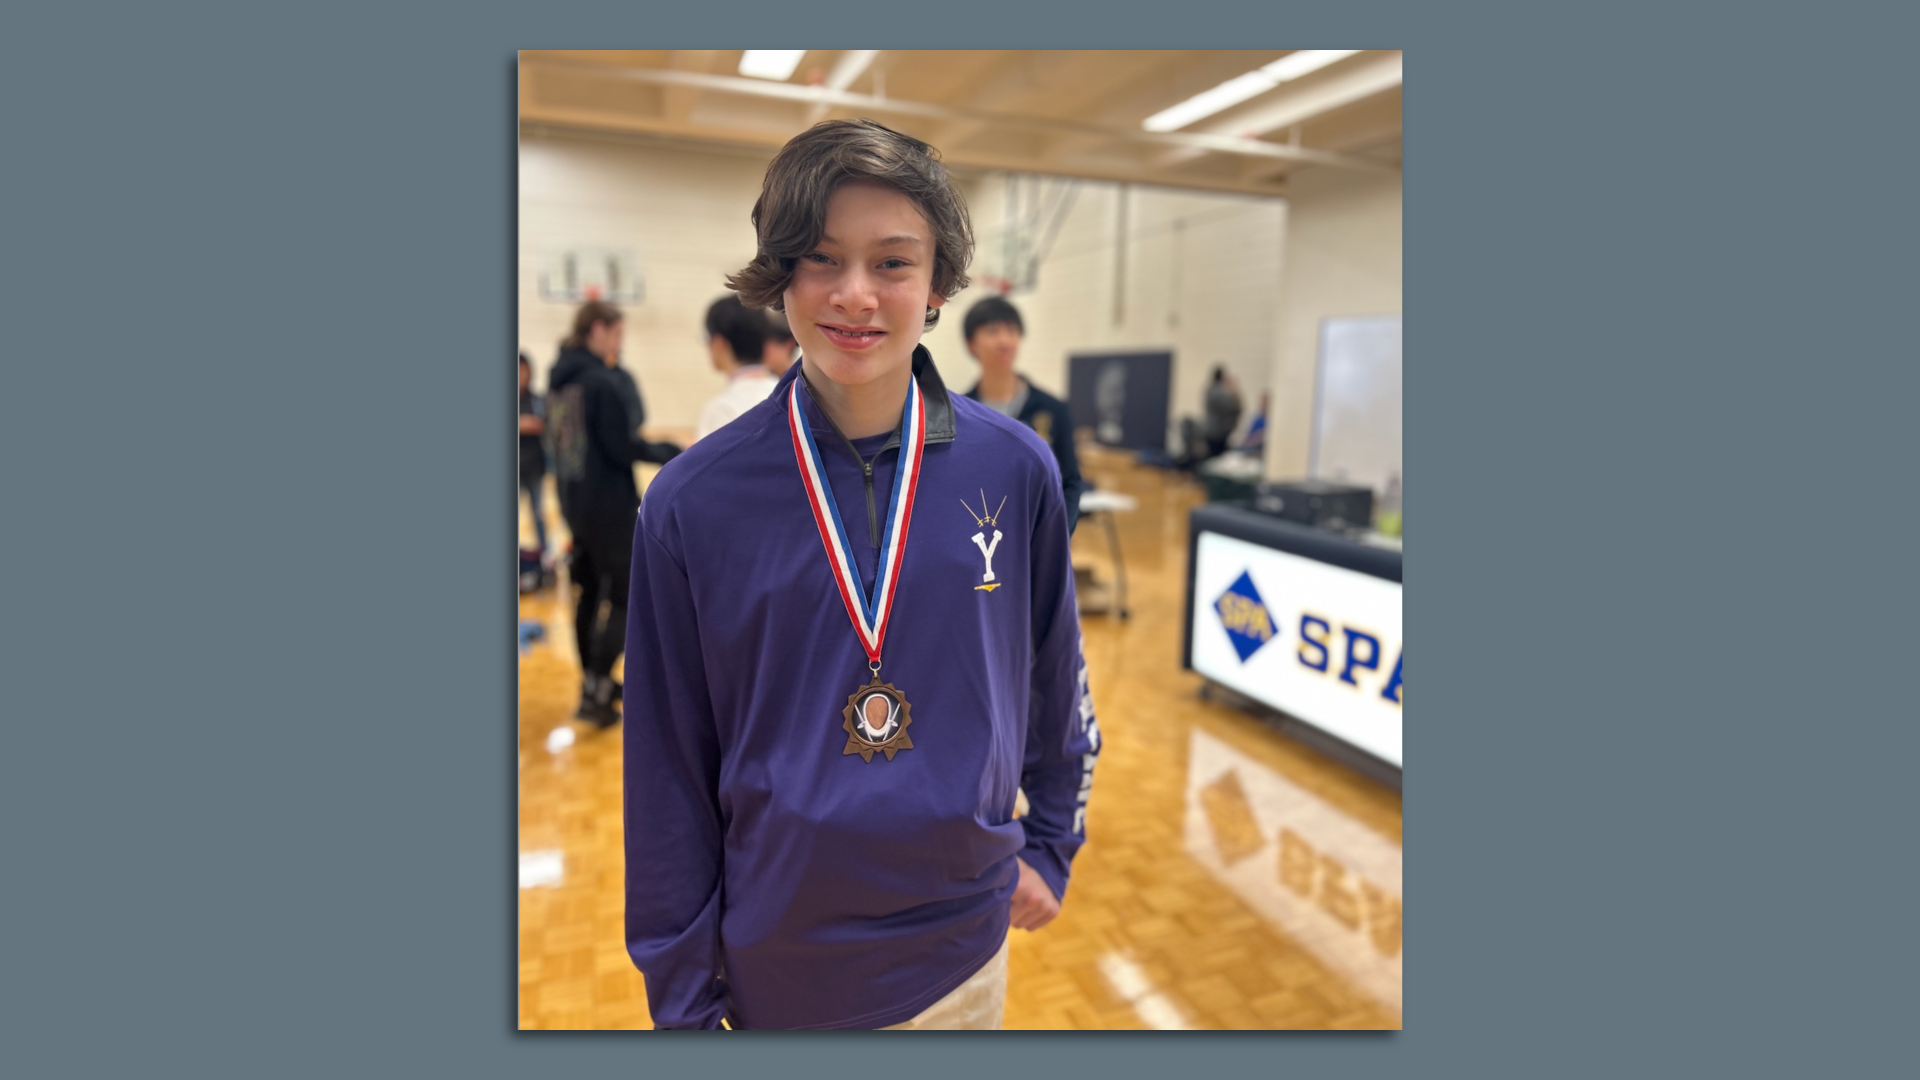 Boy with a purple shirt and a medal